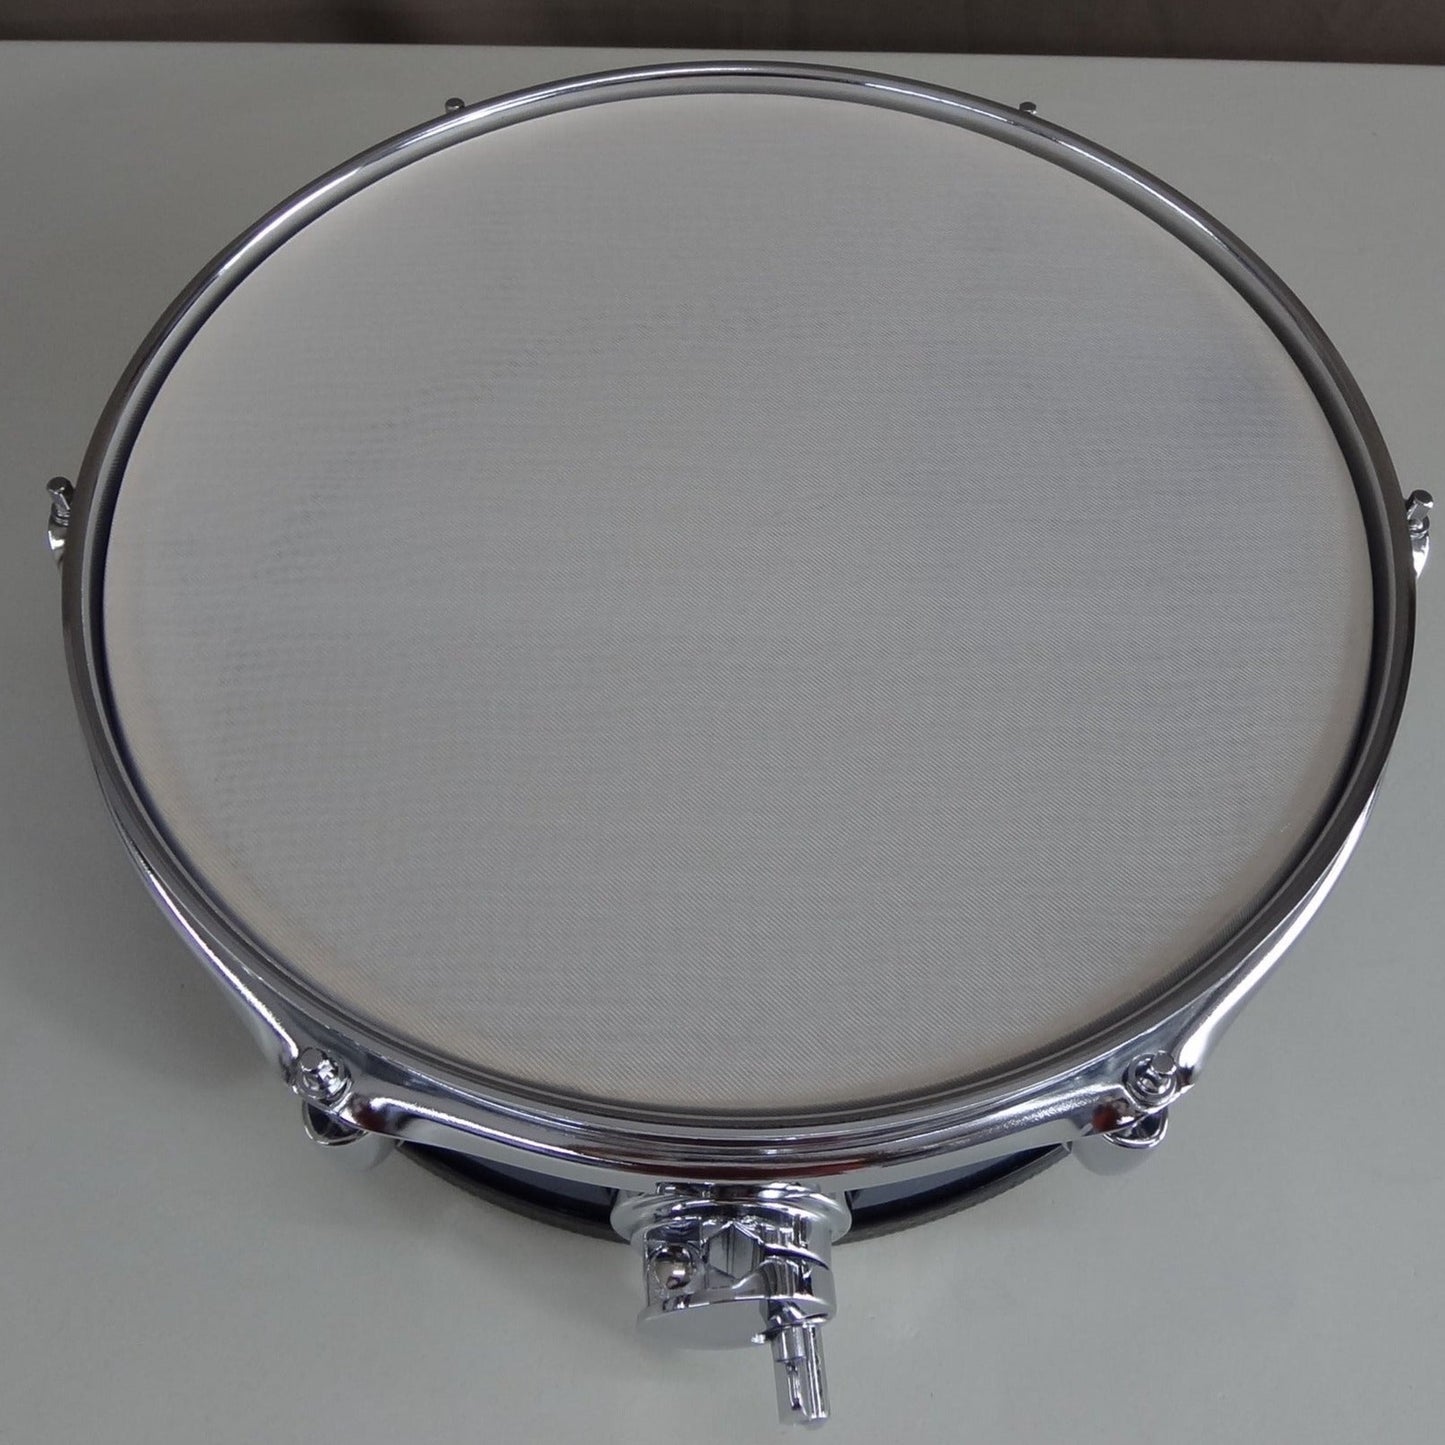 New 13 Inch Custom Electronic Snare Drum - Blue Sparkle